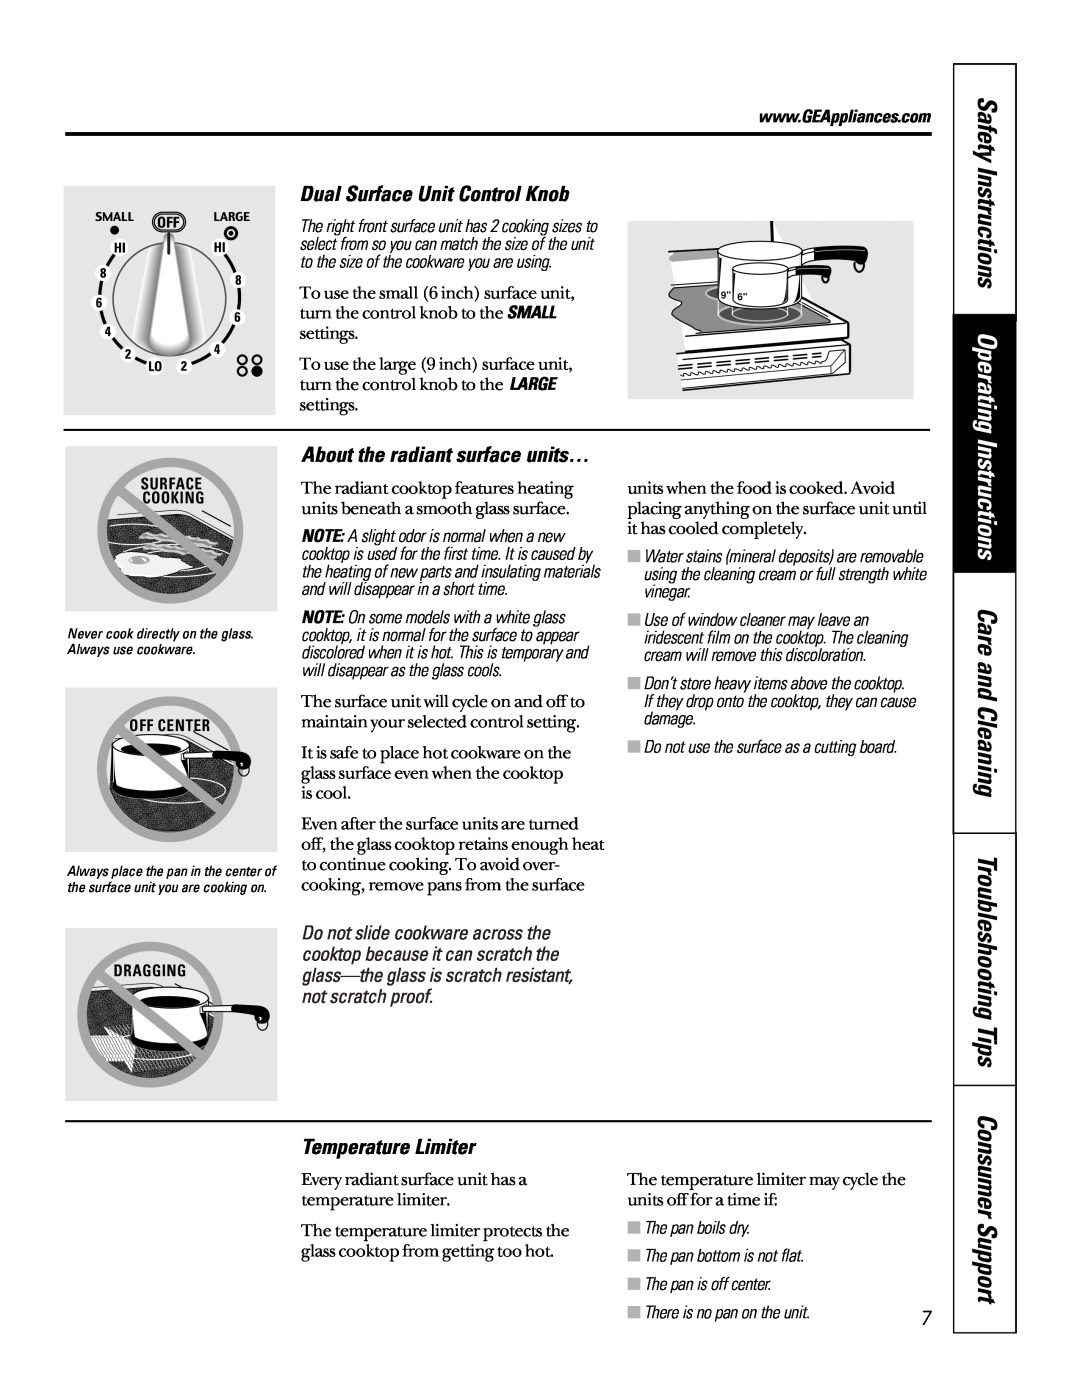 GE JD966 Safety Instructions Operating, Instructions Care and Cleaning, Dual Surface Unit Control Knob, Consumer Support 